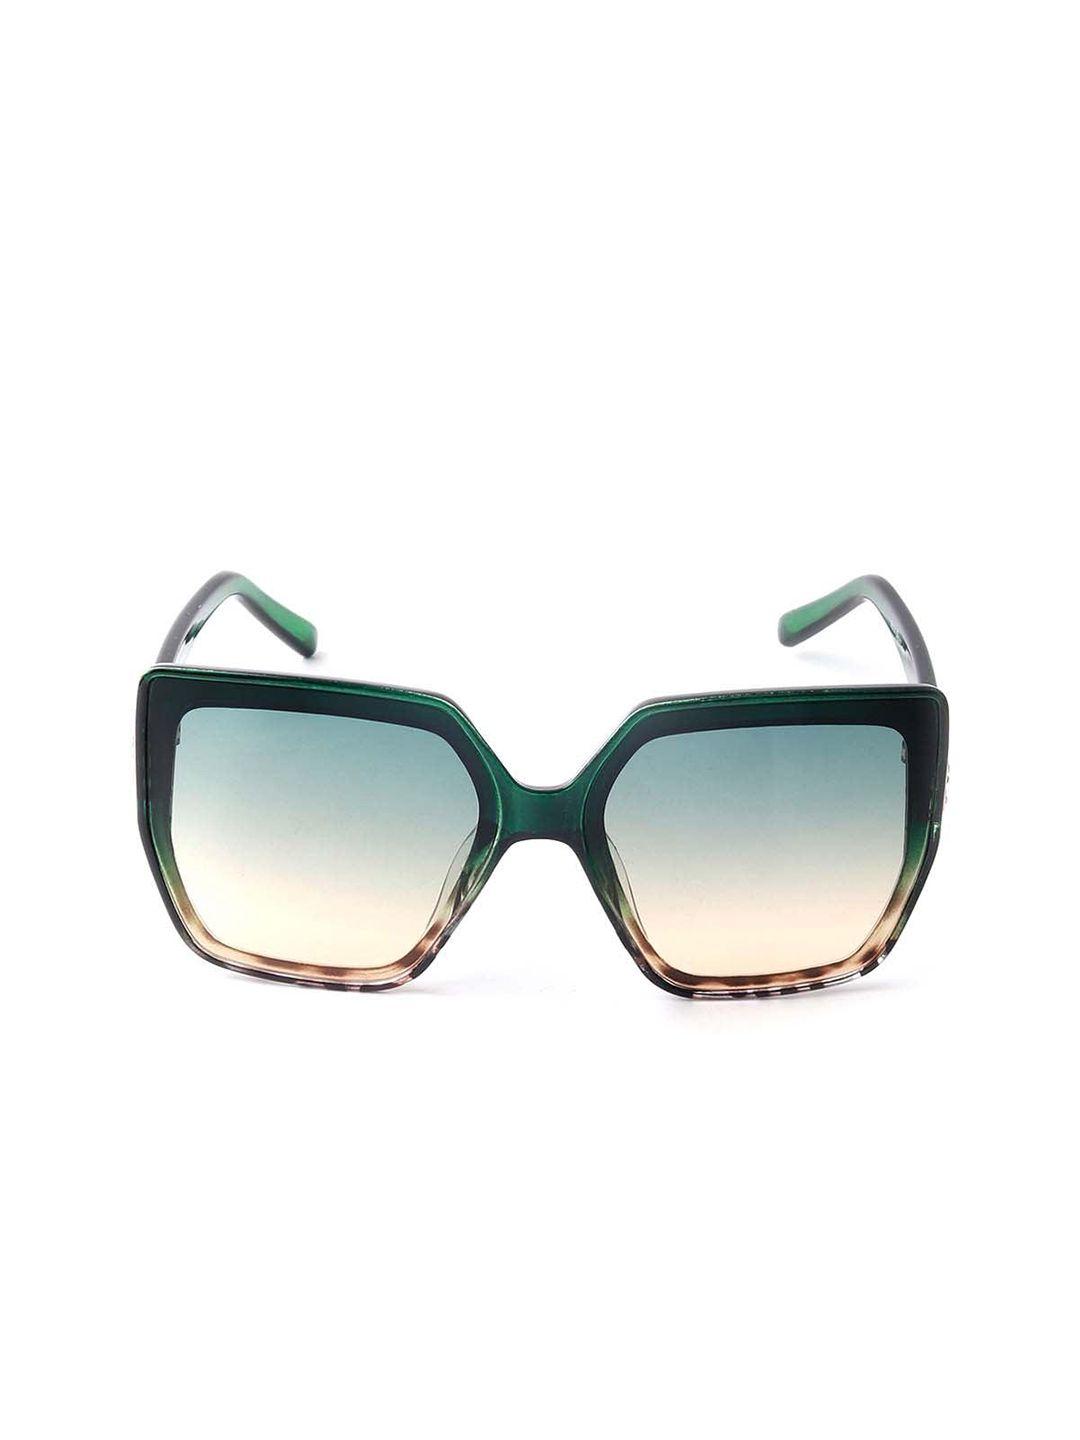 odette-women-oversized-sunglasses-with-uv-protected-lens-new584